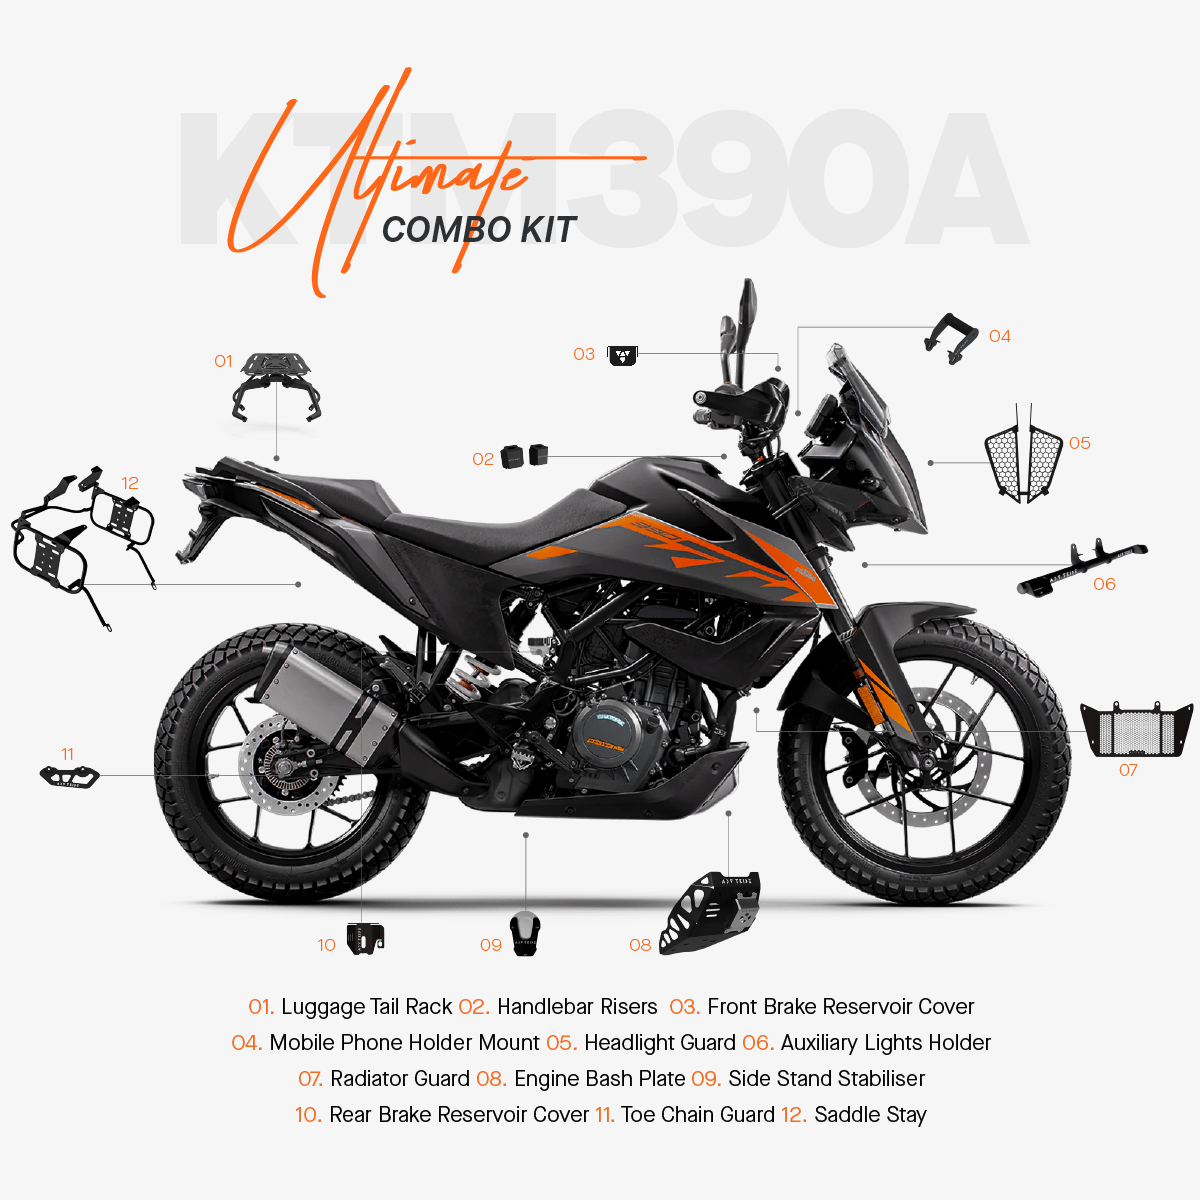 The Ultimate Combo Kit of 12 Accessories for KTM 390 – ADVTRIBE World